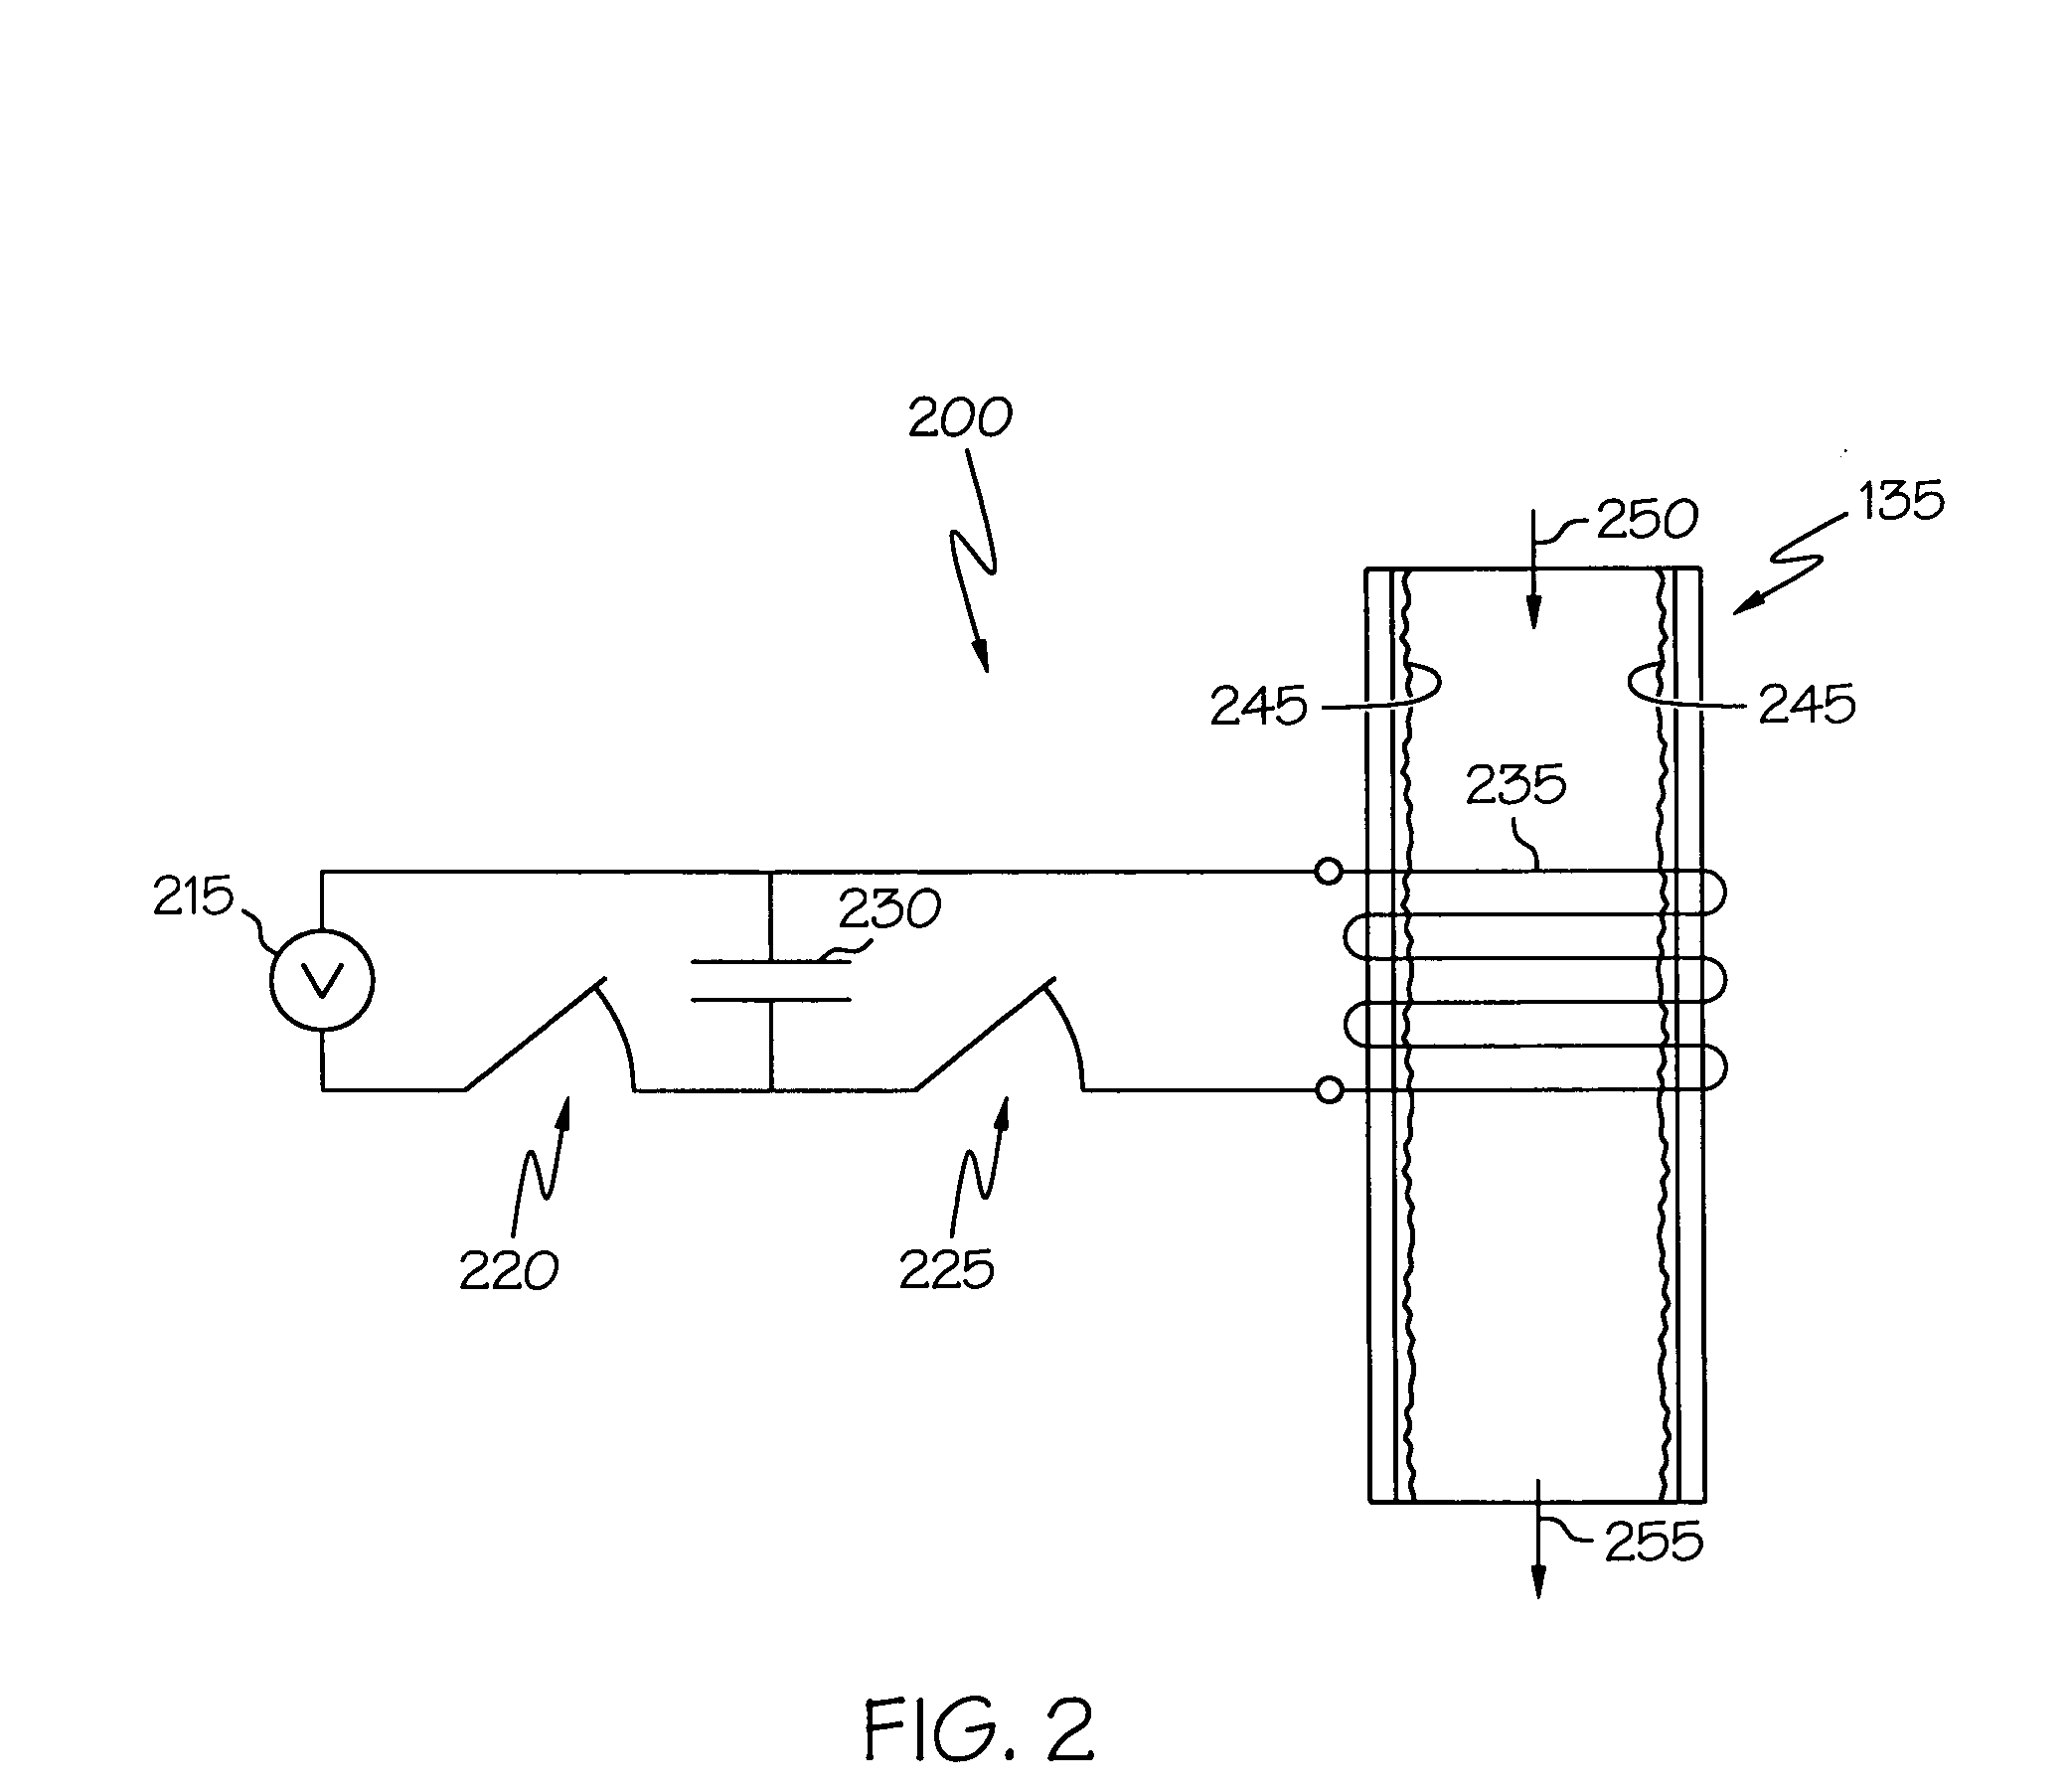 Thermal catalytic ignition system for airborne applications